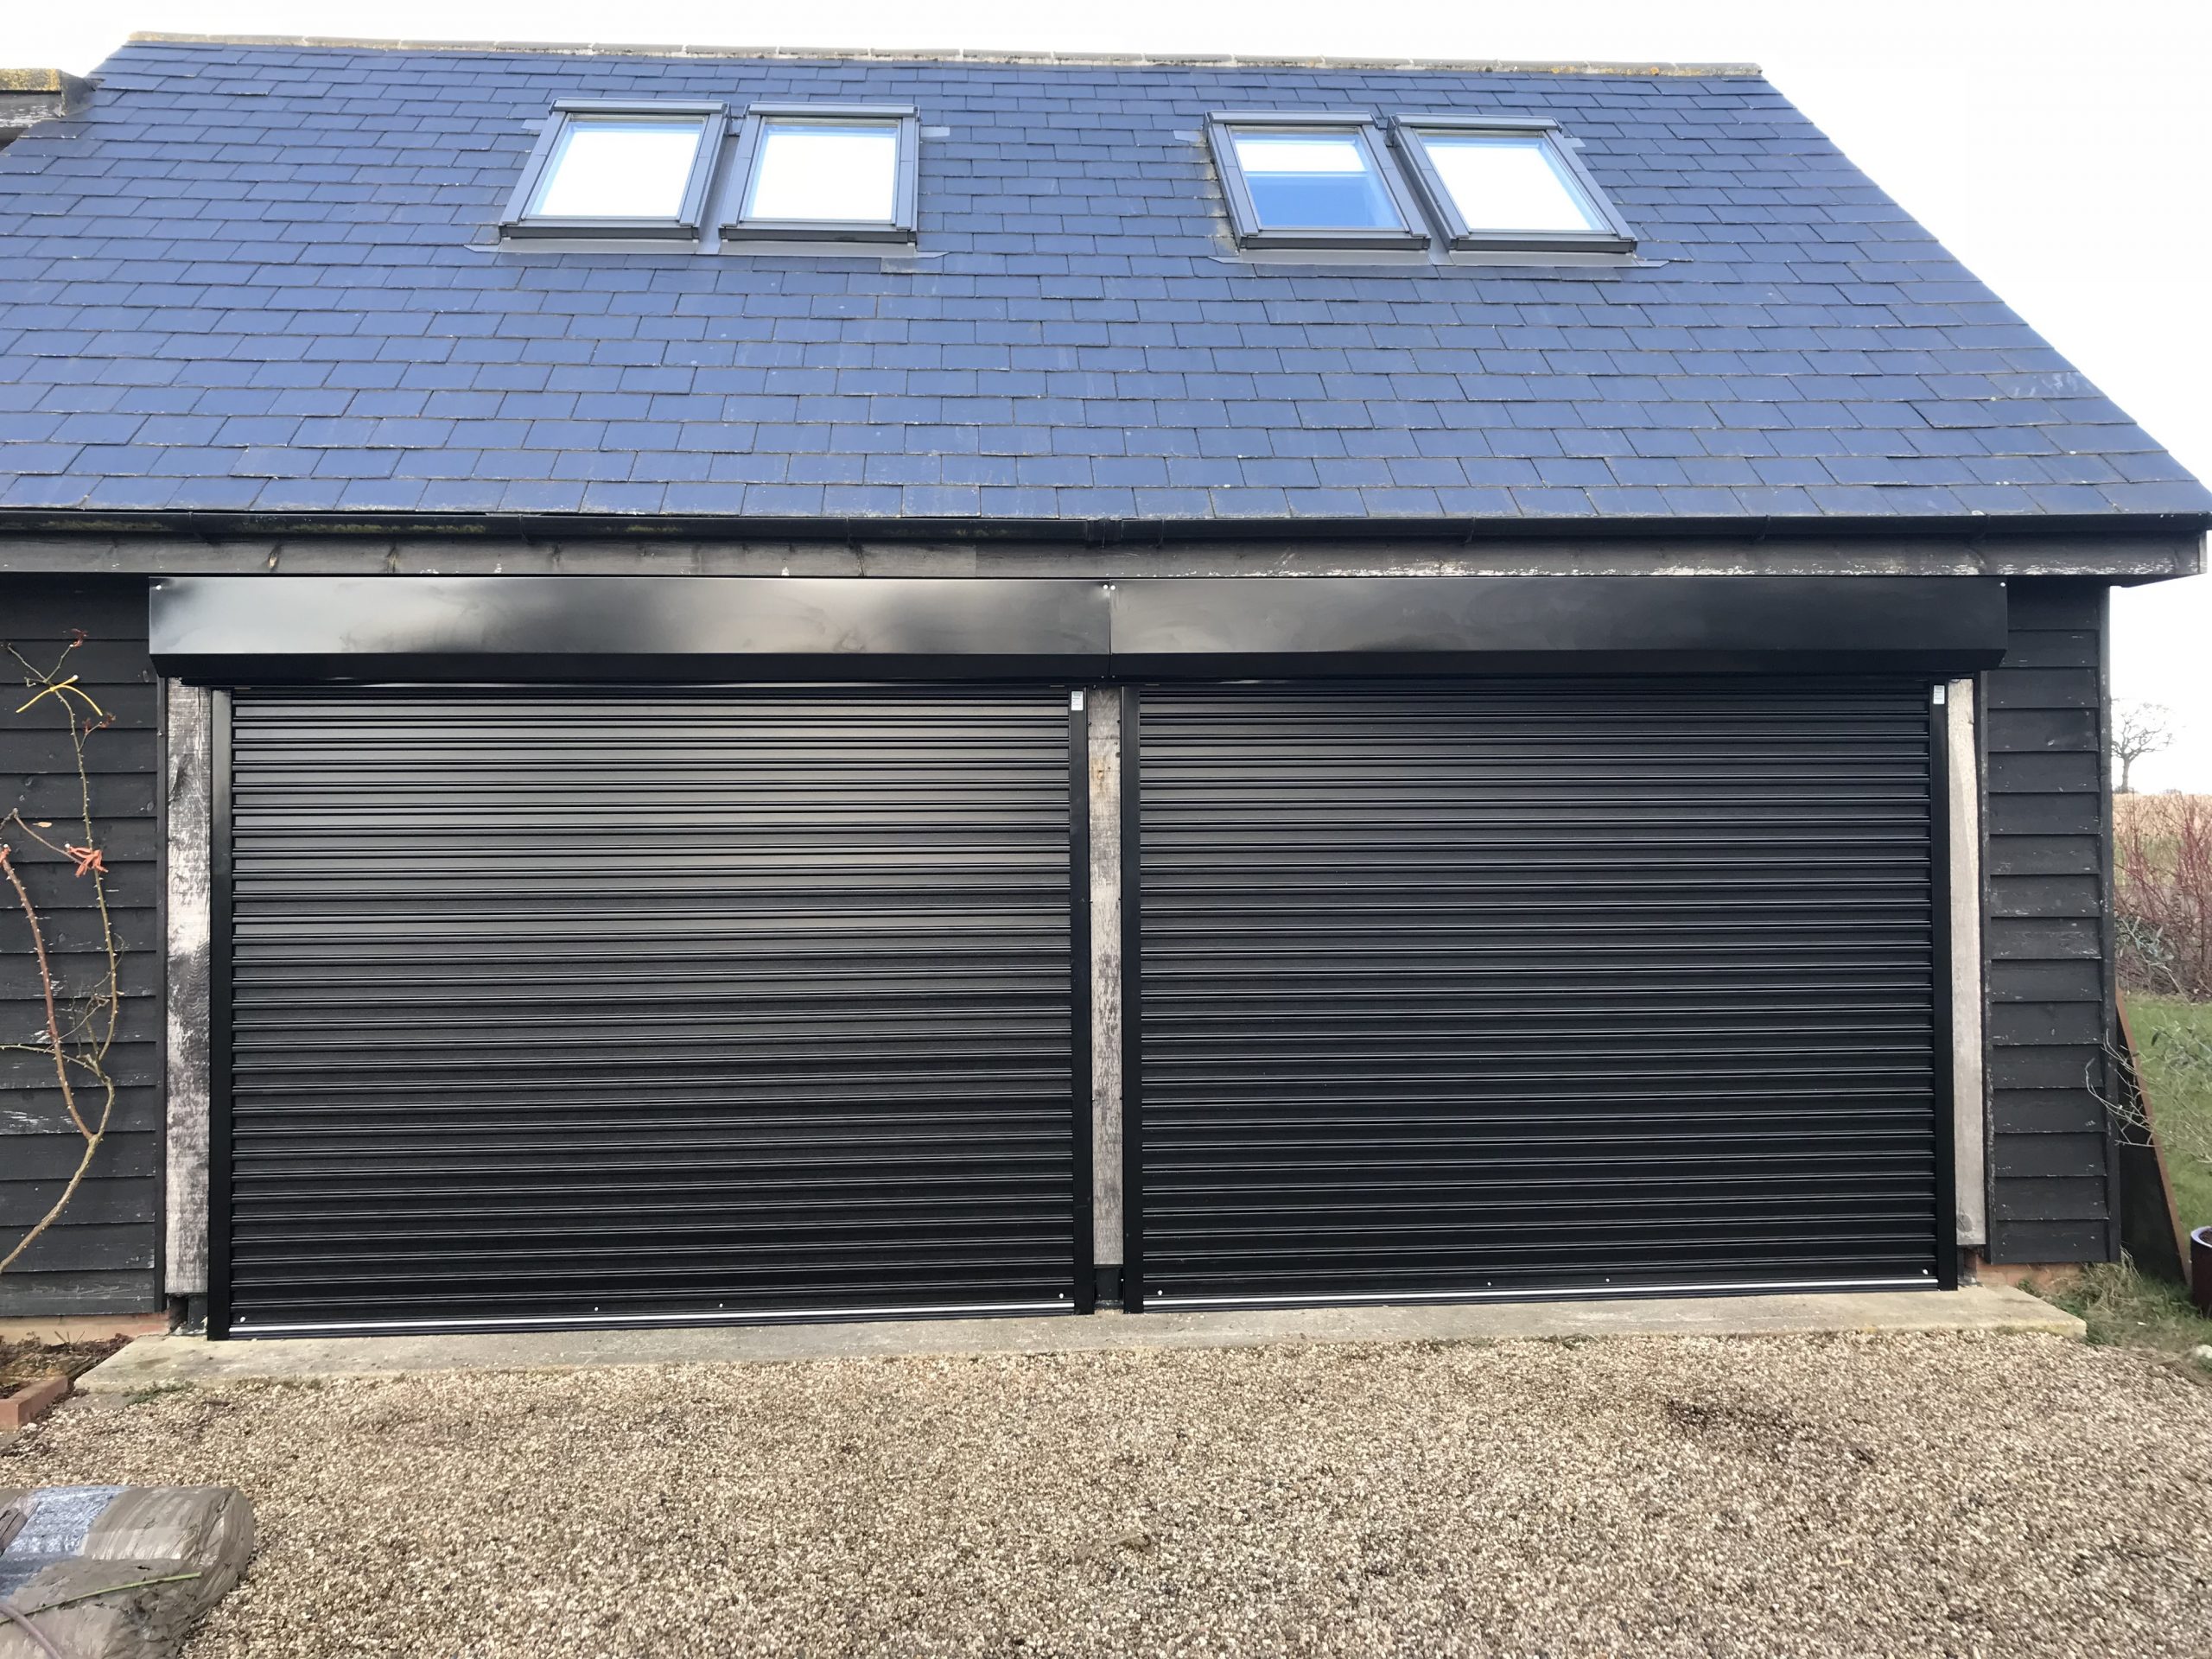 7 Benefits of Roller Shutters For Your Business